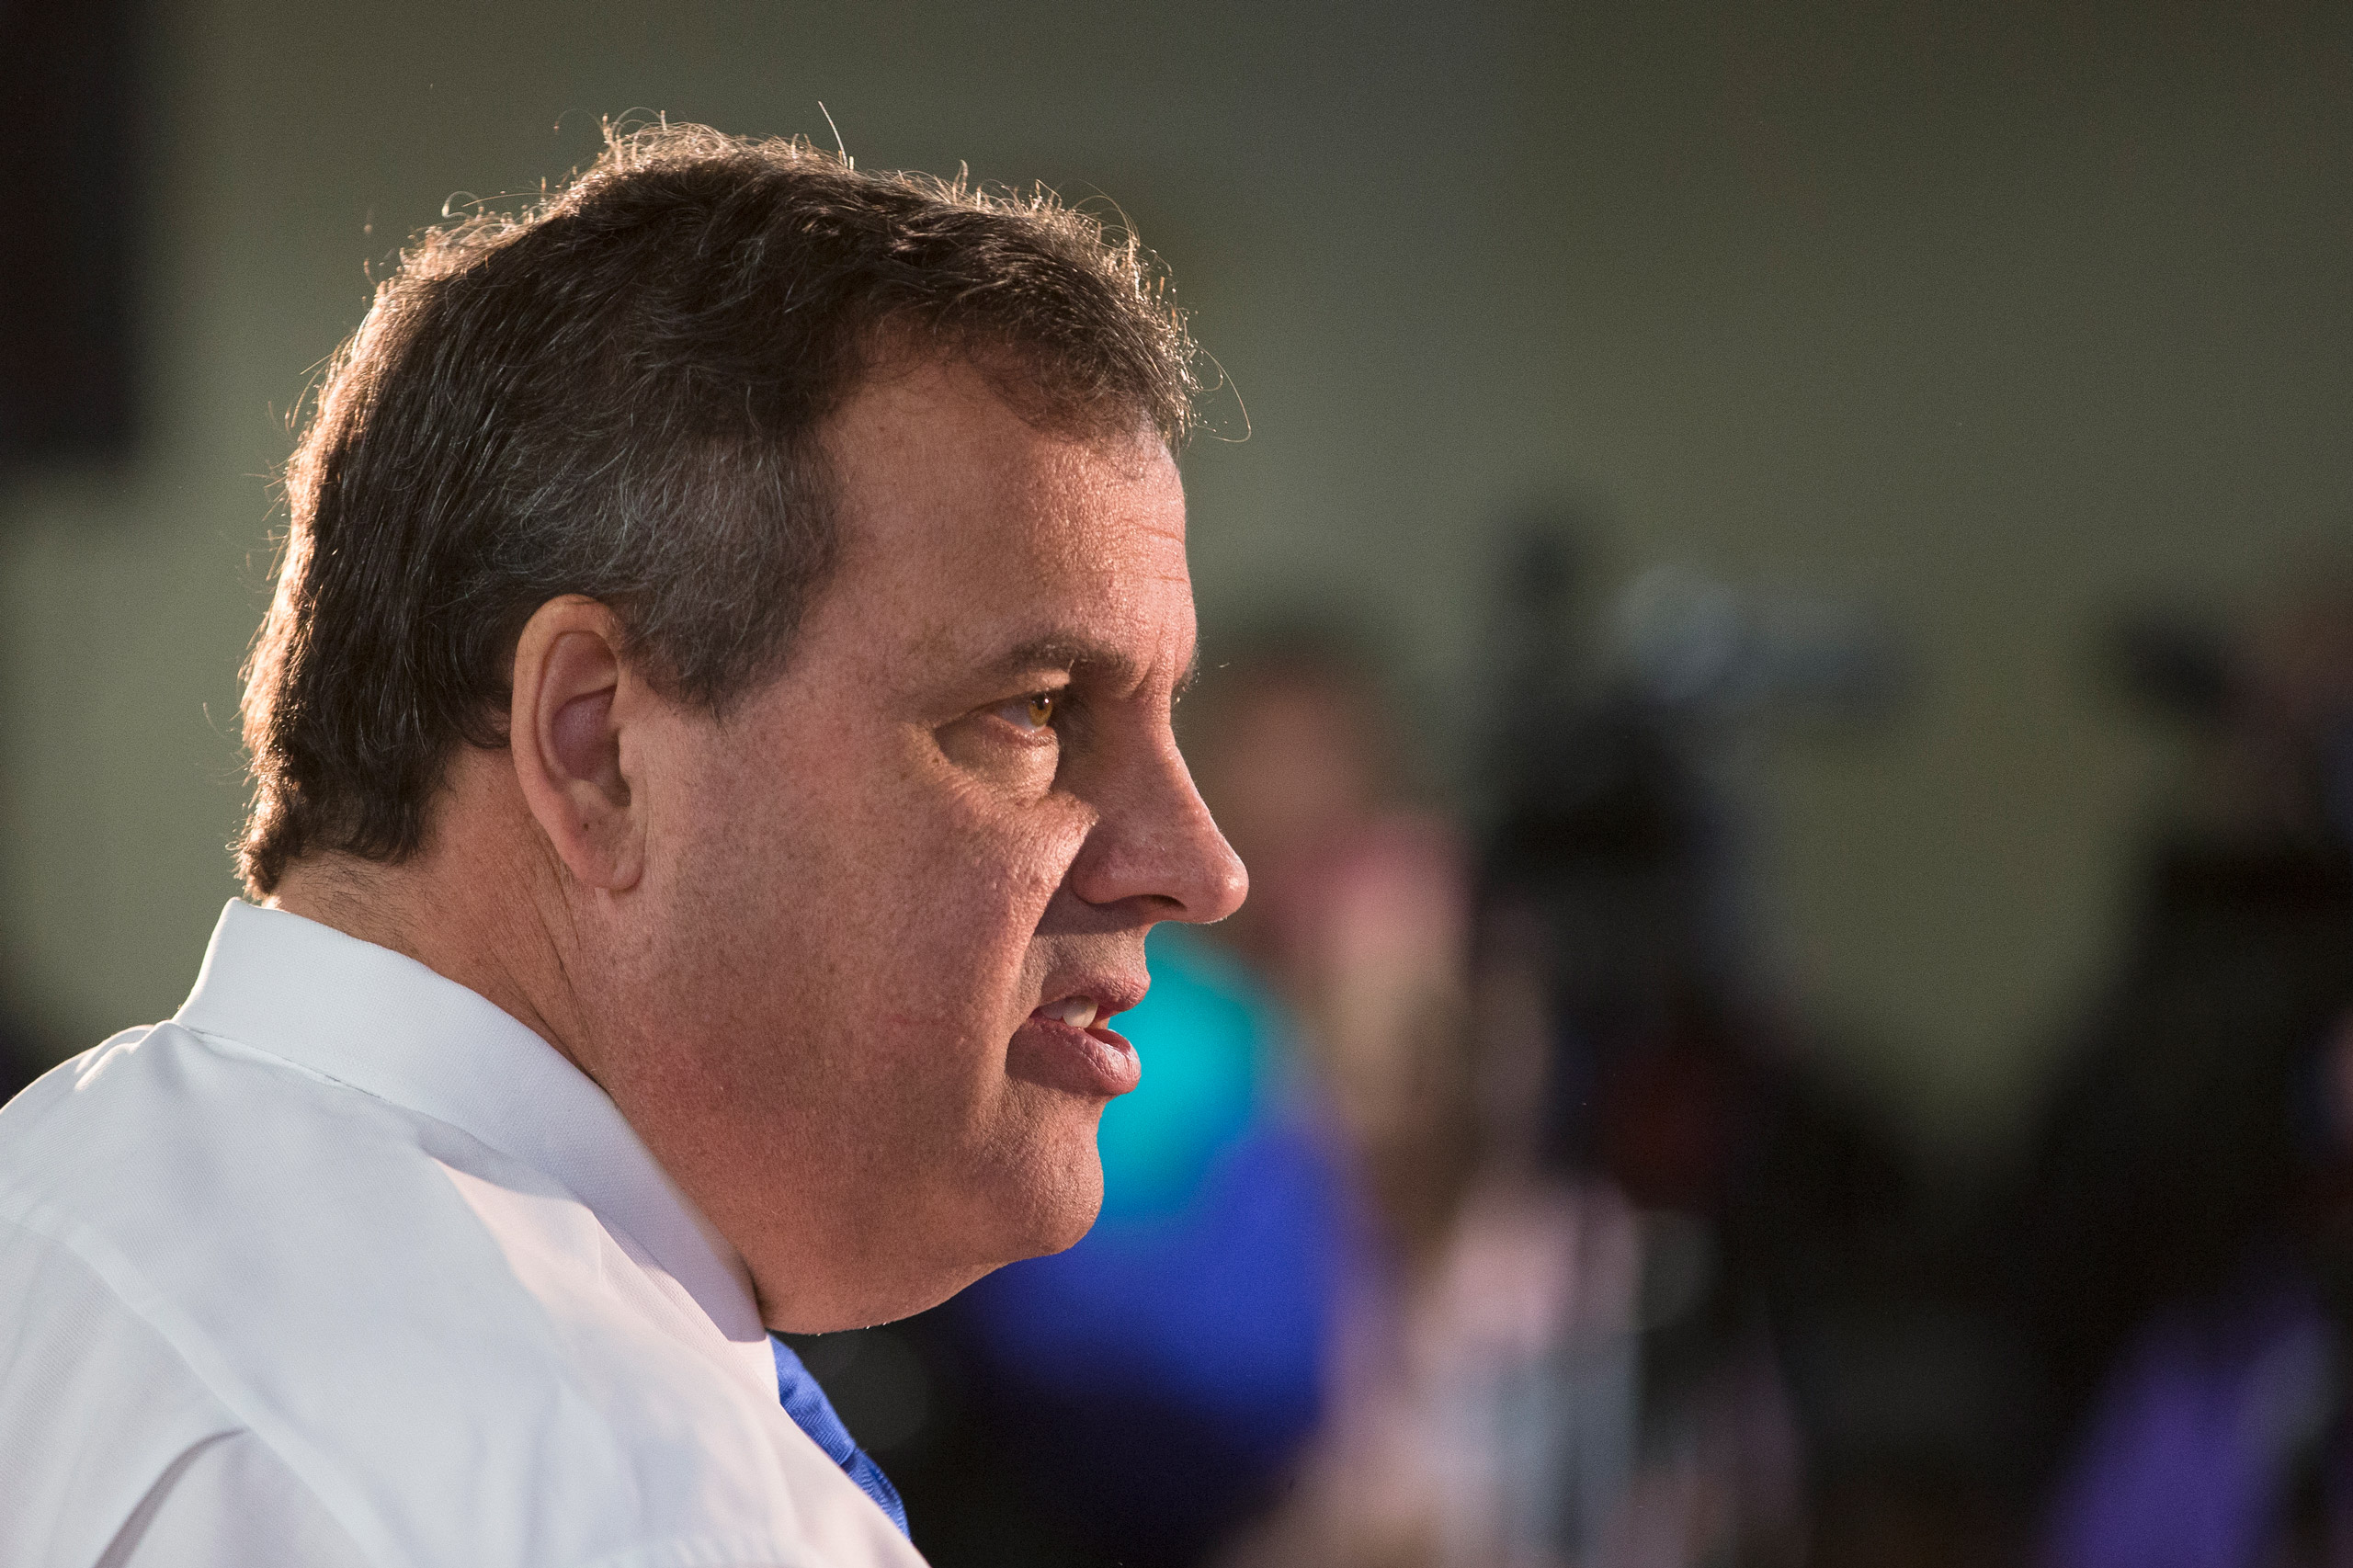 Chris Christie speaks during a town hall style campaign stop at Pinardville Fire Station in Manchester, N.H.  Jan. 13, 2016. (John Minchillo—AP)